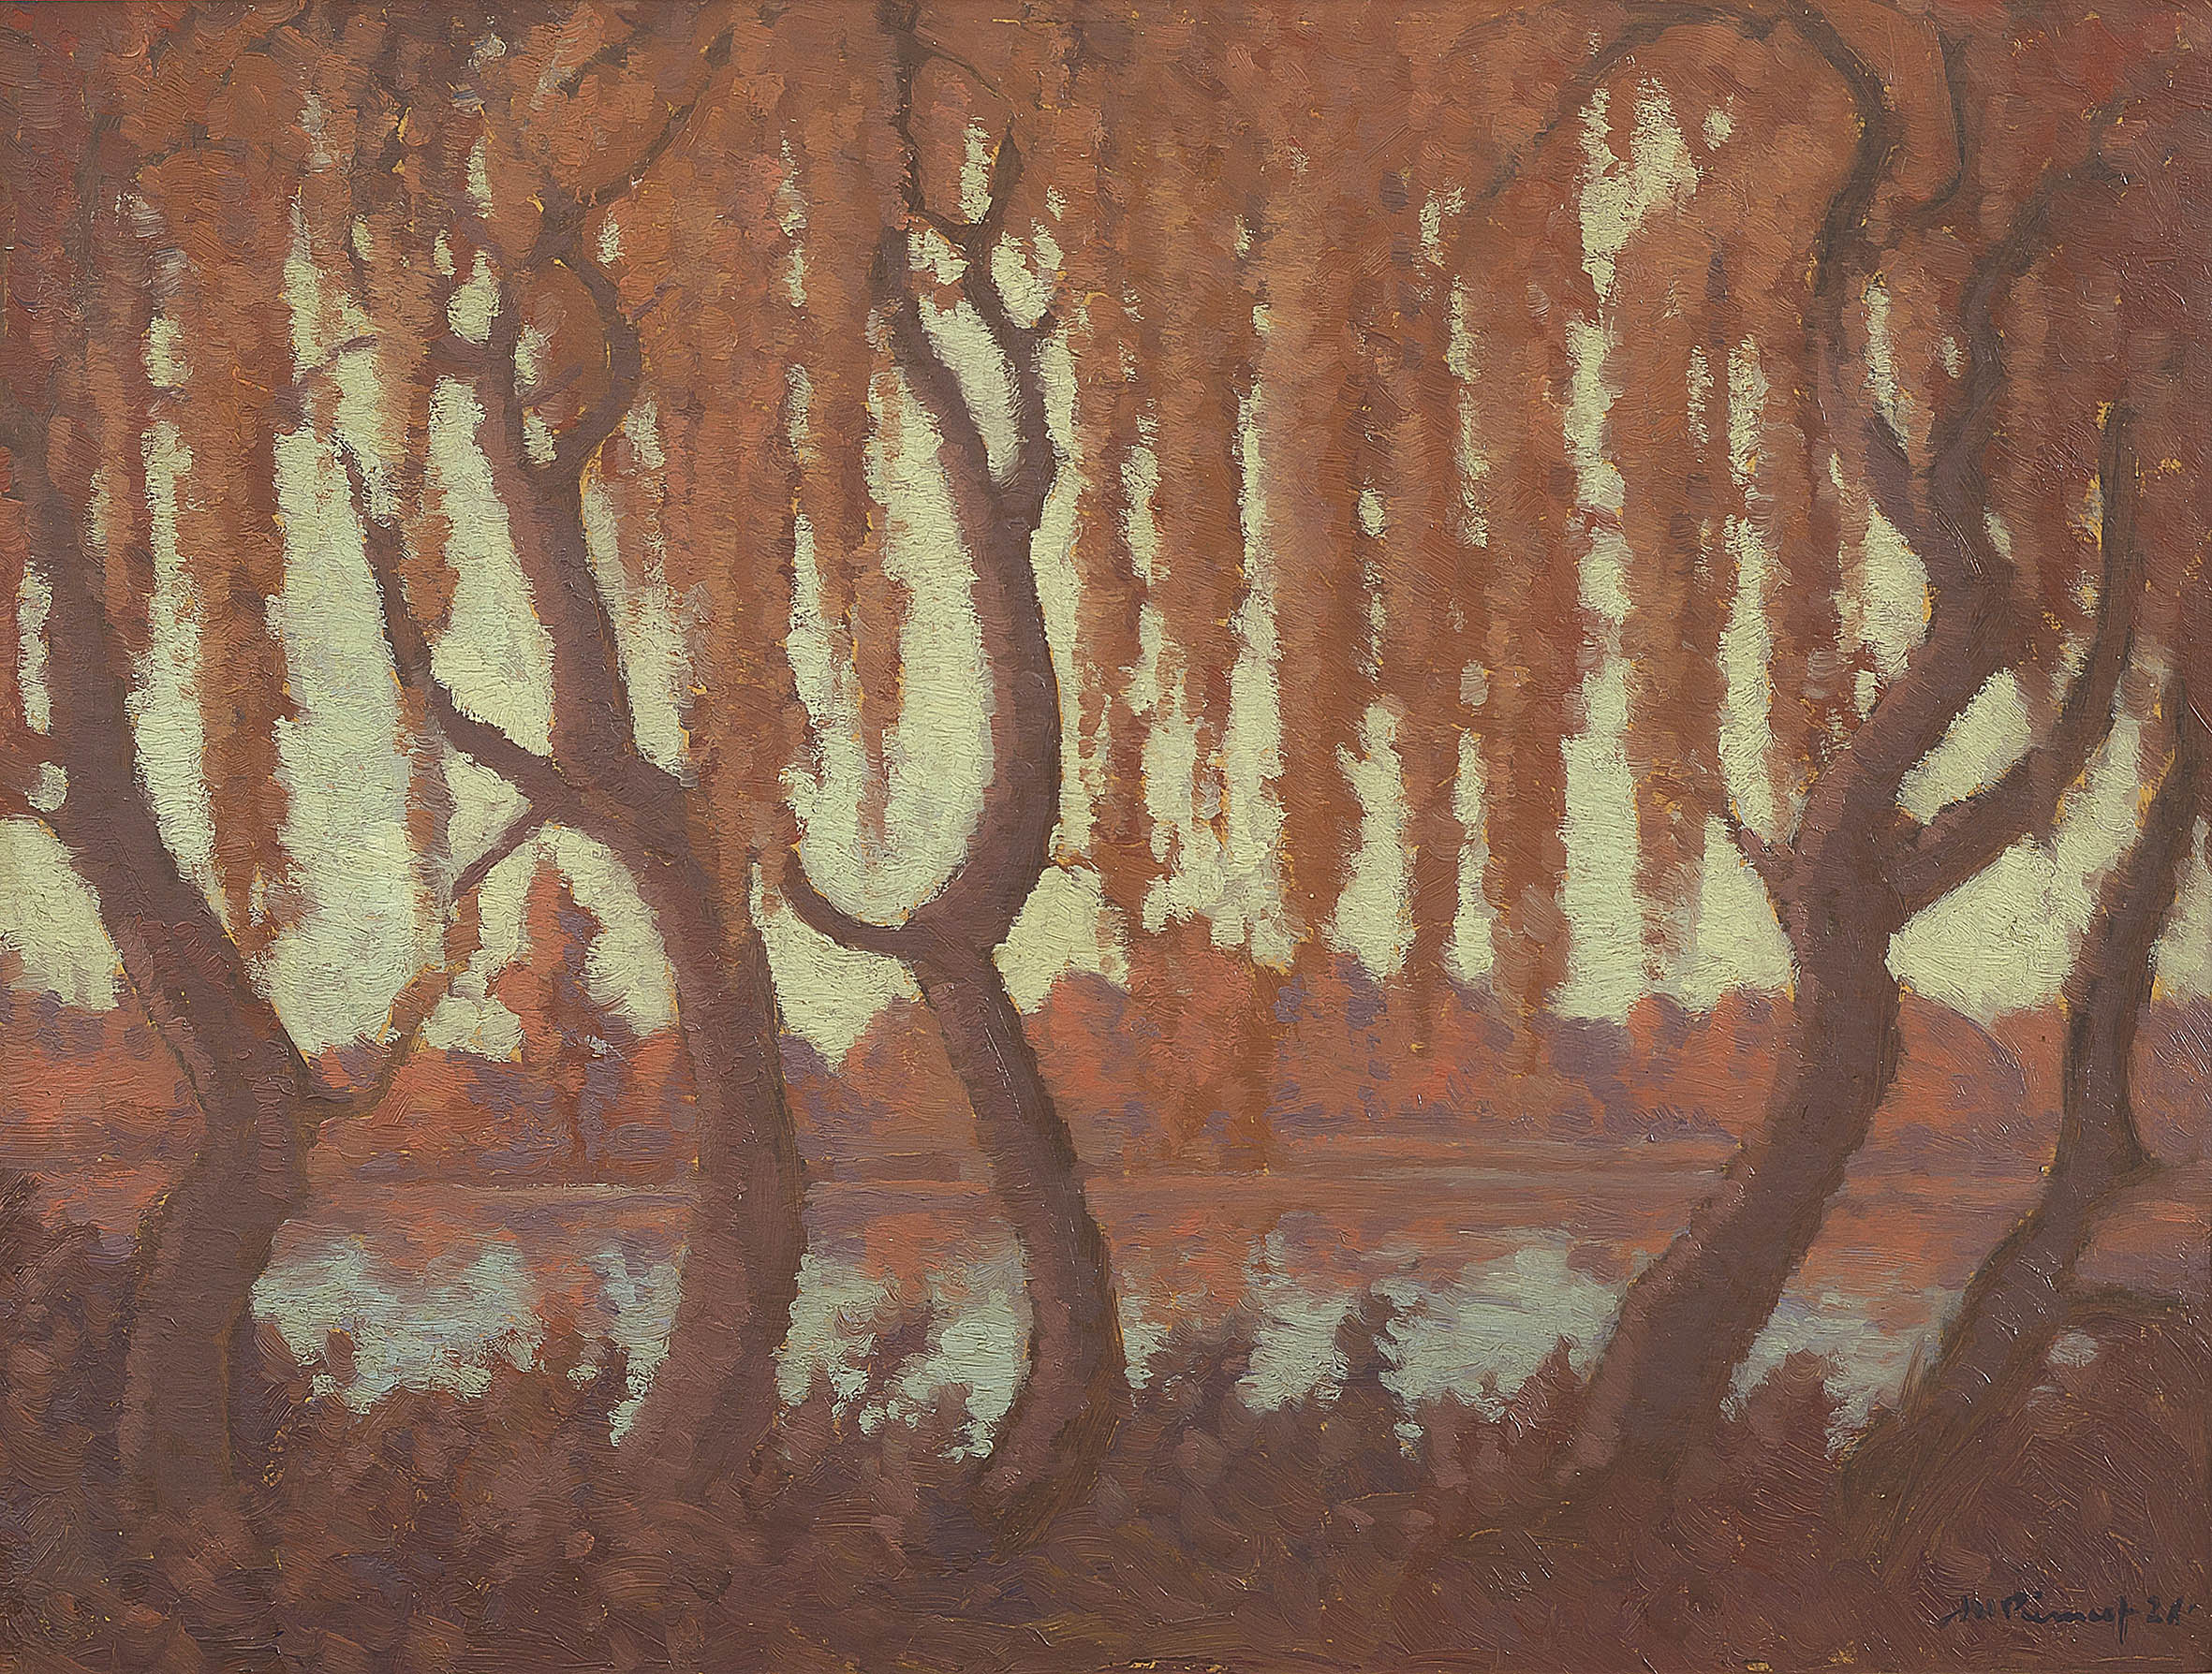 Jacob Hendrik Pierneef; Willow Trees on a River Bank